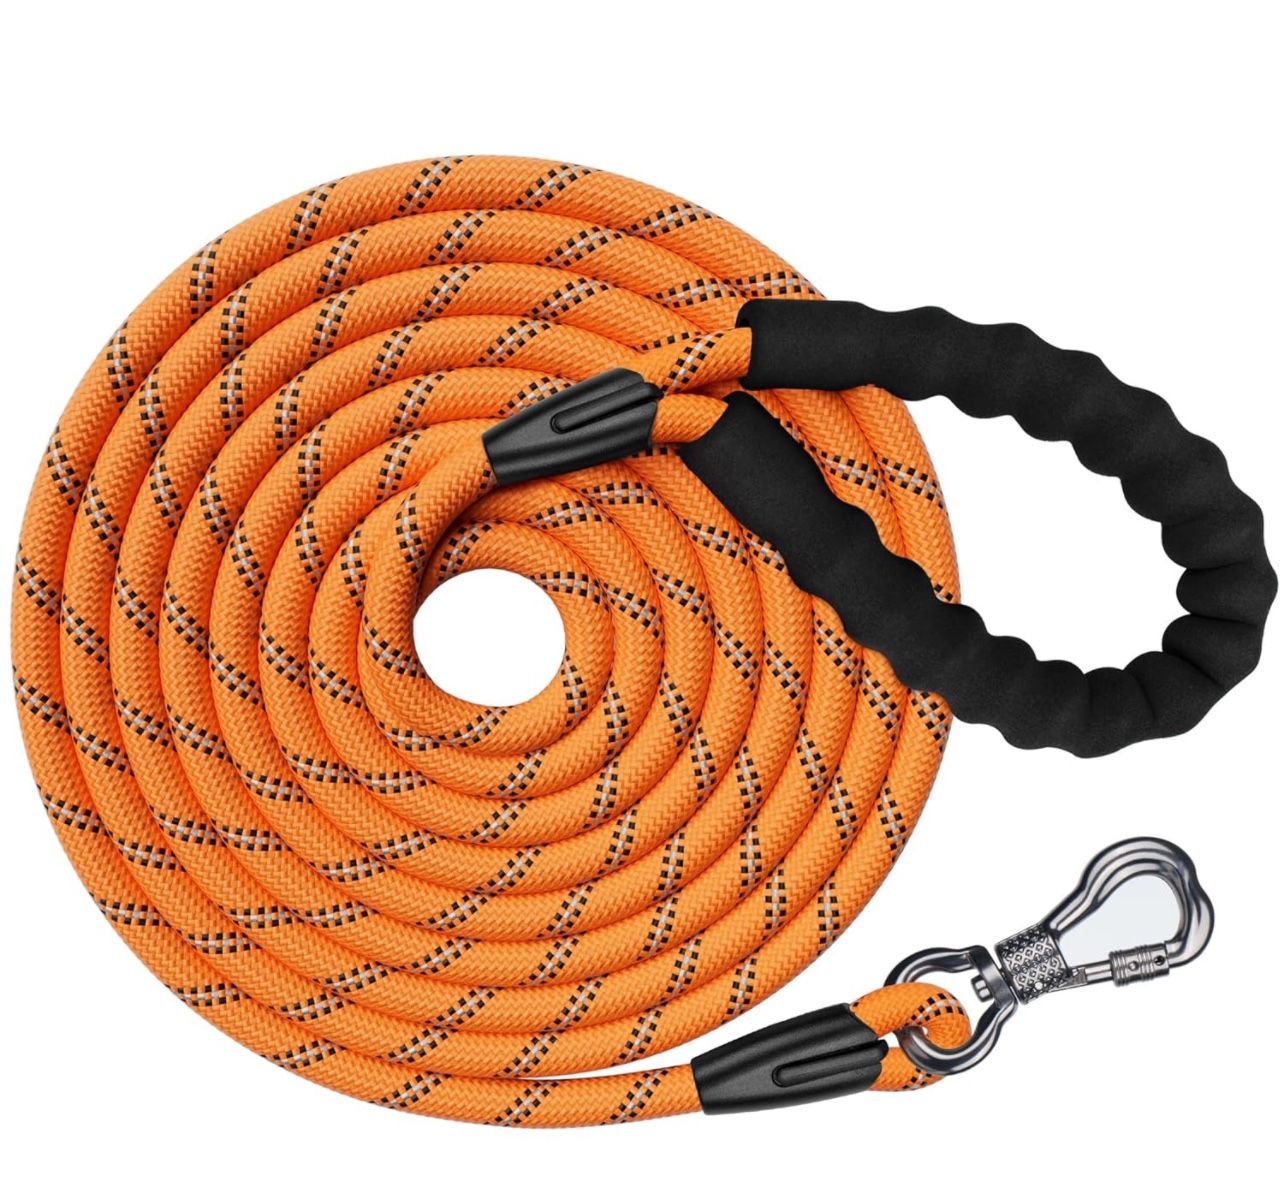 Brandnew 5FT Strong Dog Leash, Orange Rope Dog Leash with Swivel Lockable Hook and Comfortable Padded Handle, Cat Puppy Leash Lead for Small Medium La